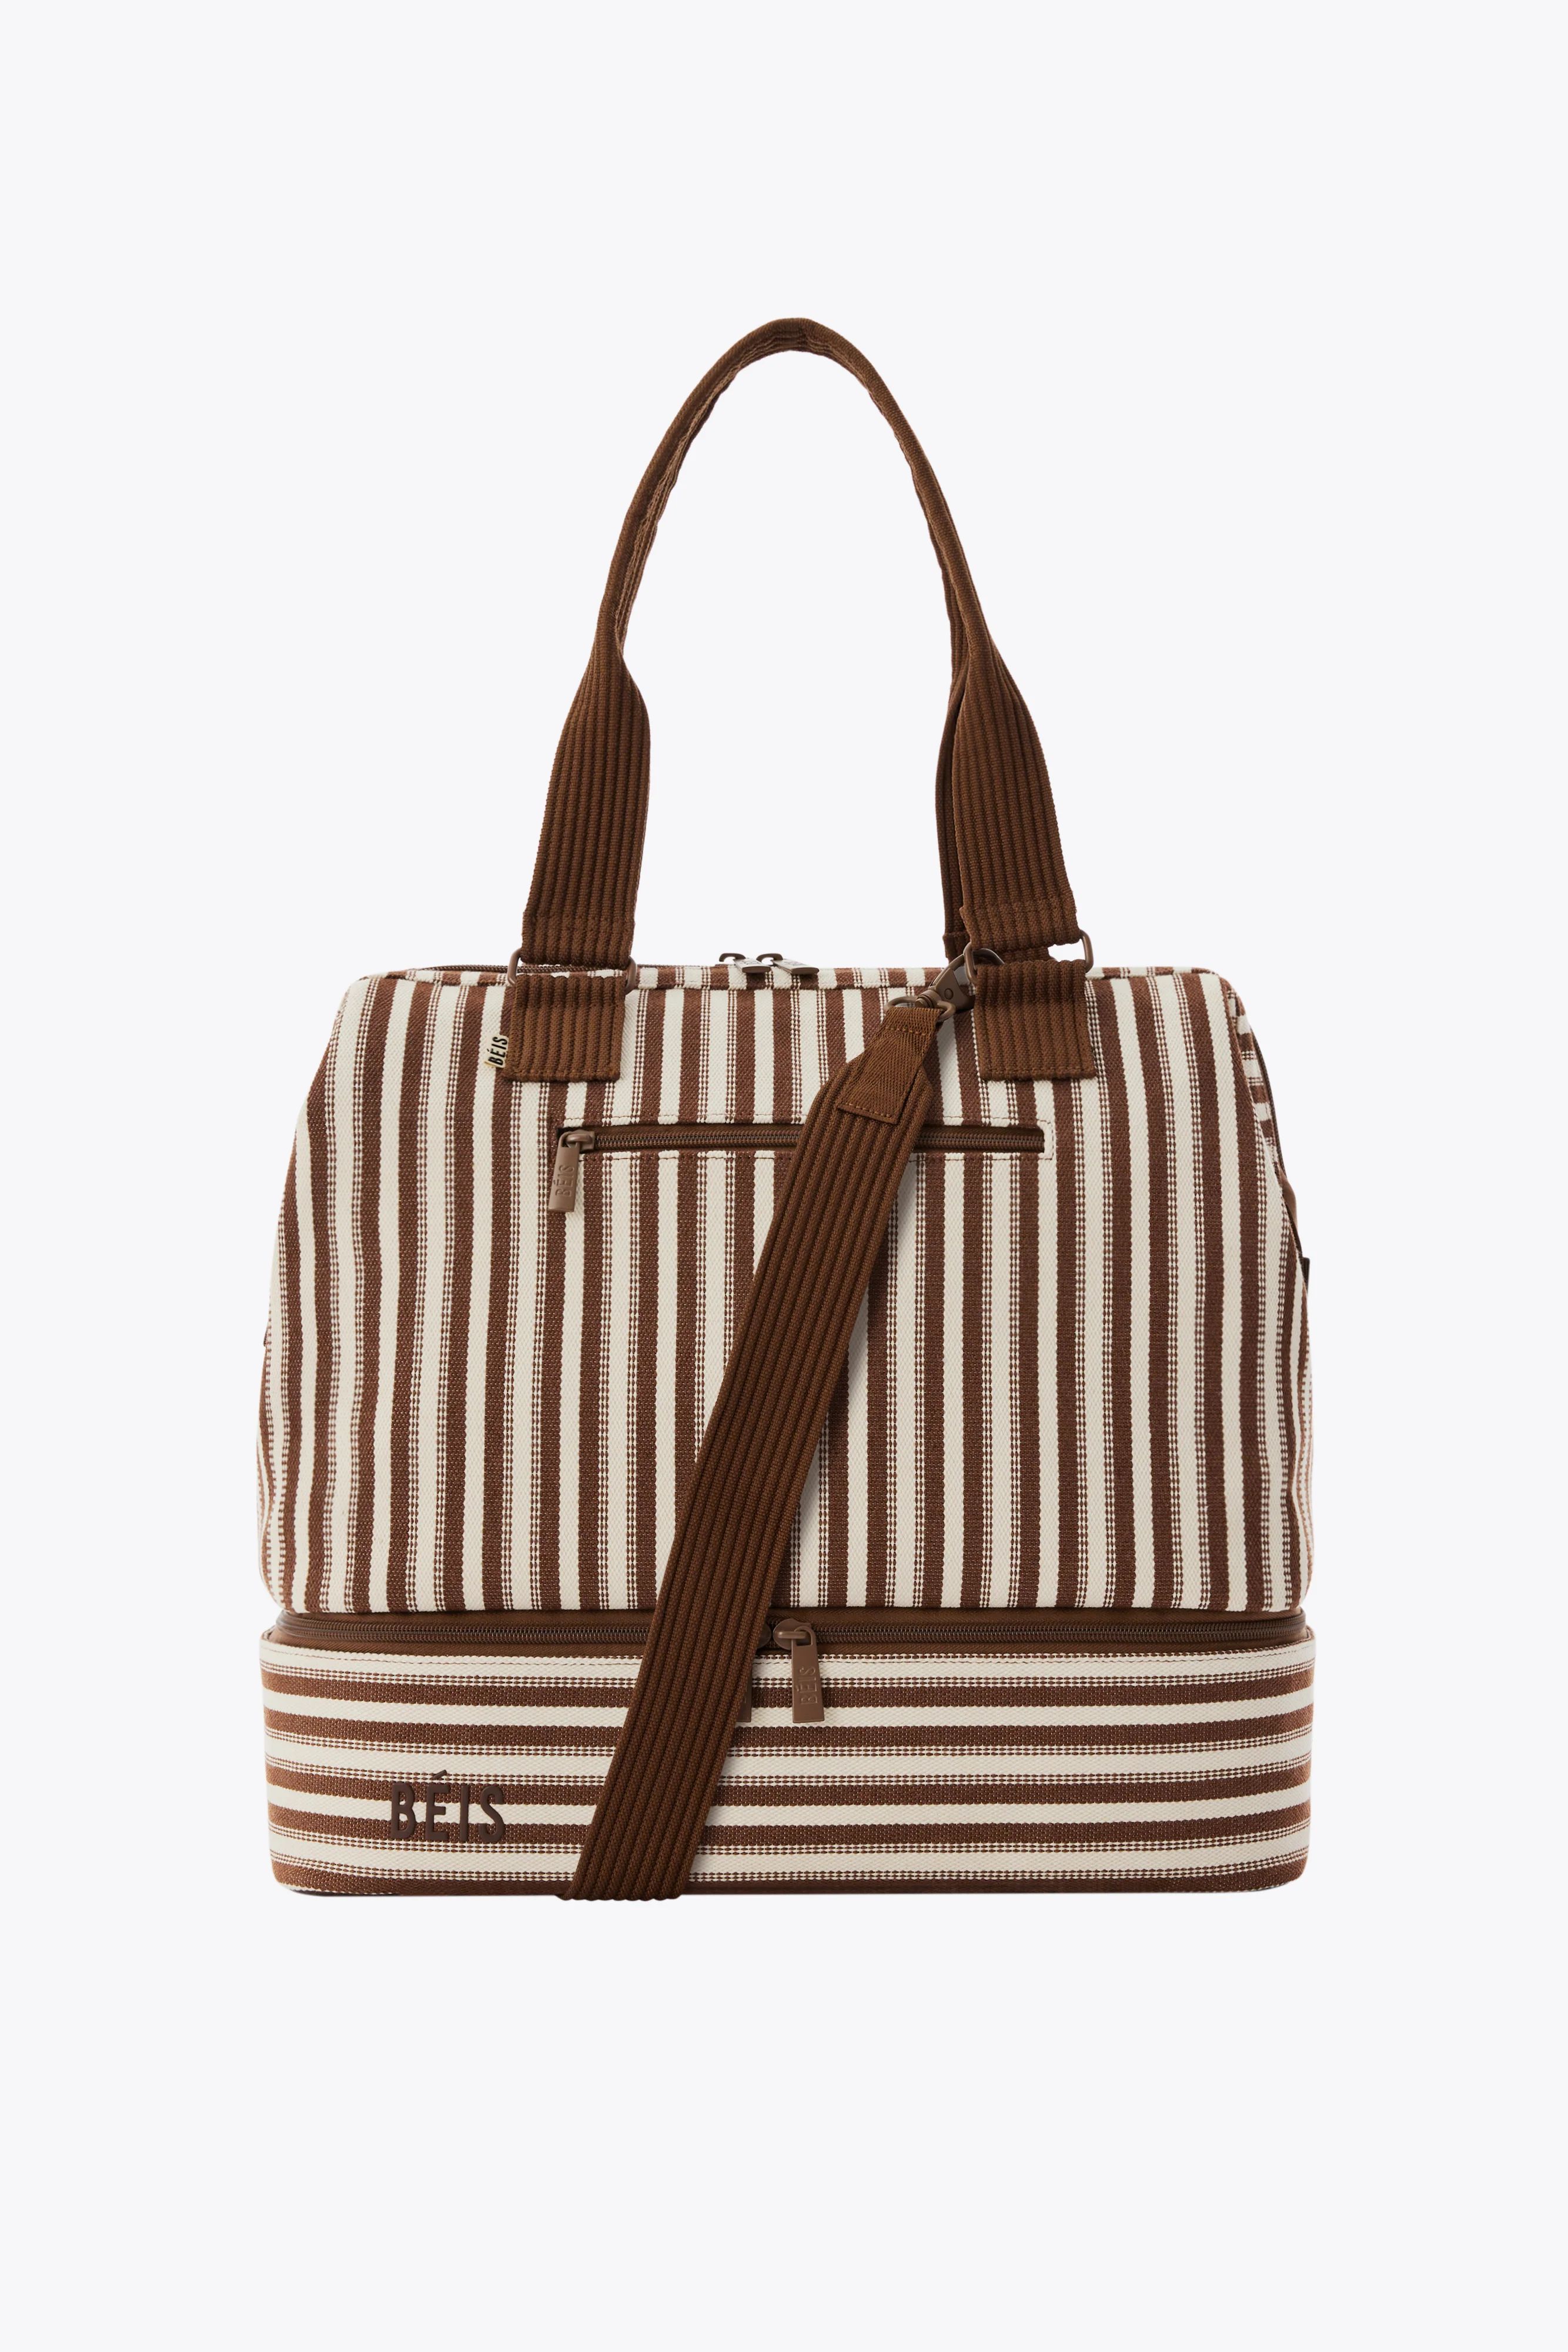 BÉIS 'The Mini Weekender' in Maple Stripe - Maple Striped Small Weekend & Overnight Bag | BÉIS Travel